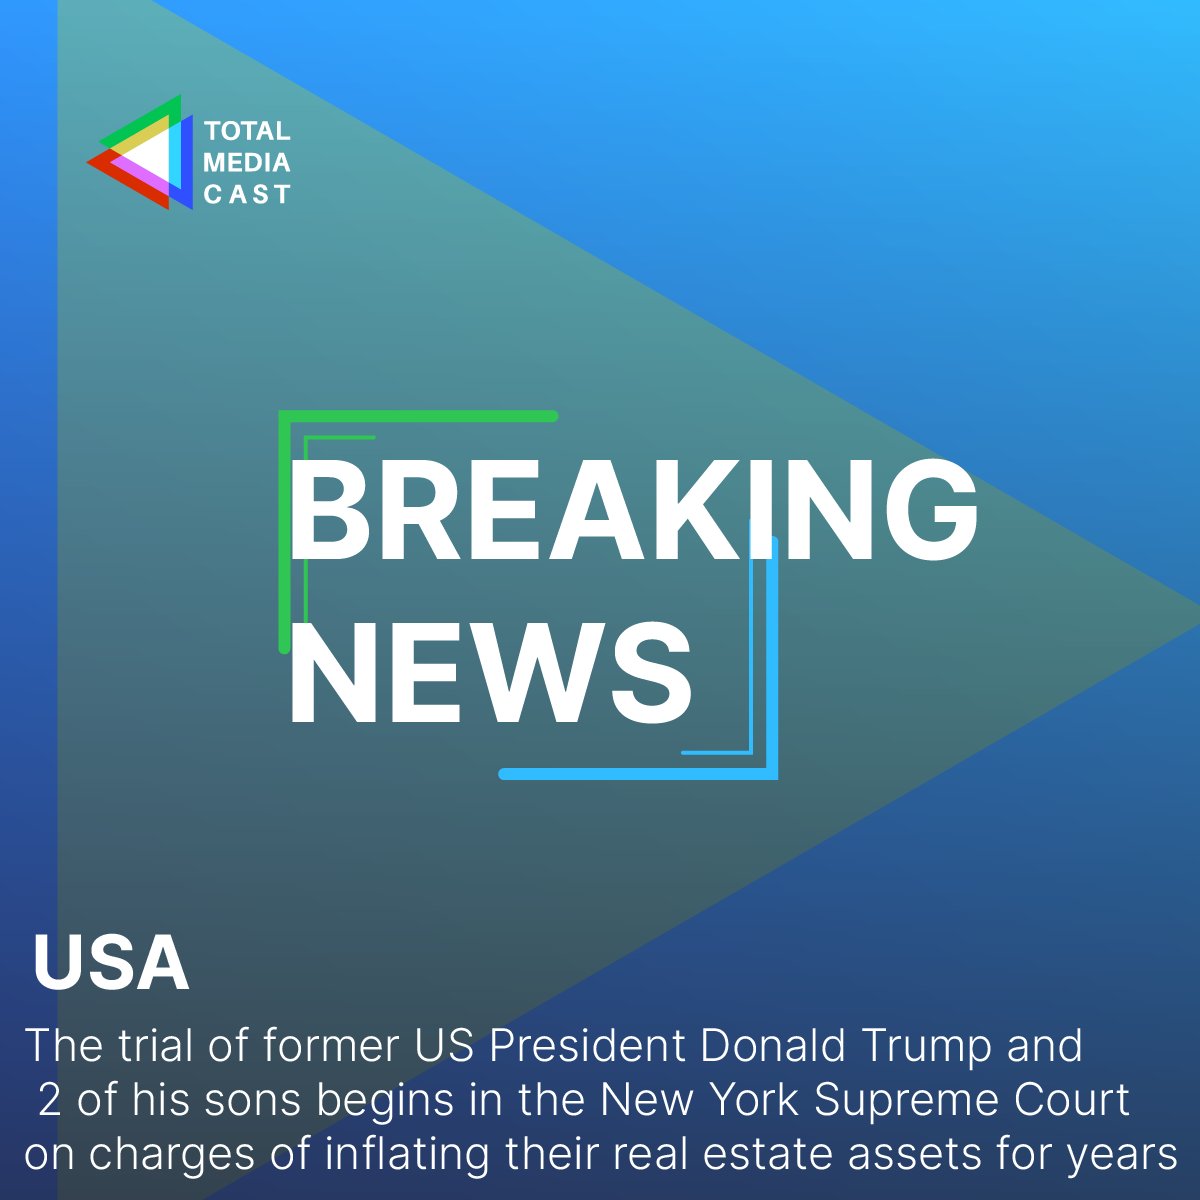 The trial of former US President Donald Trump and two of his sons begins in the New York Supreme Court on charges of inflating their real estate assets for years #USA #trial #DonaldTrump #NewYork #Amplify #Realestateassets
#TotalMediaCast